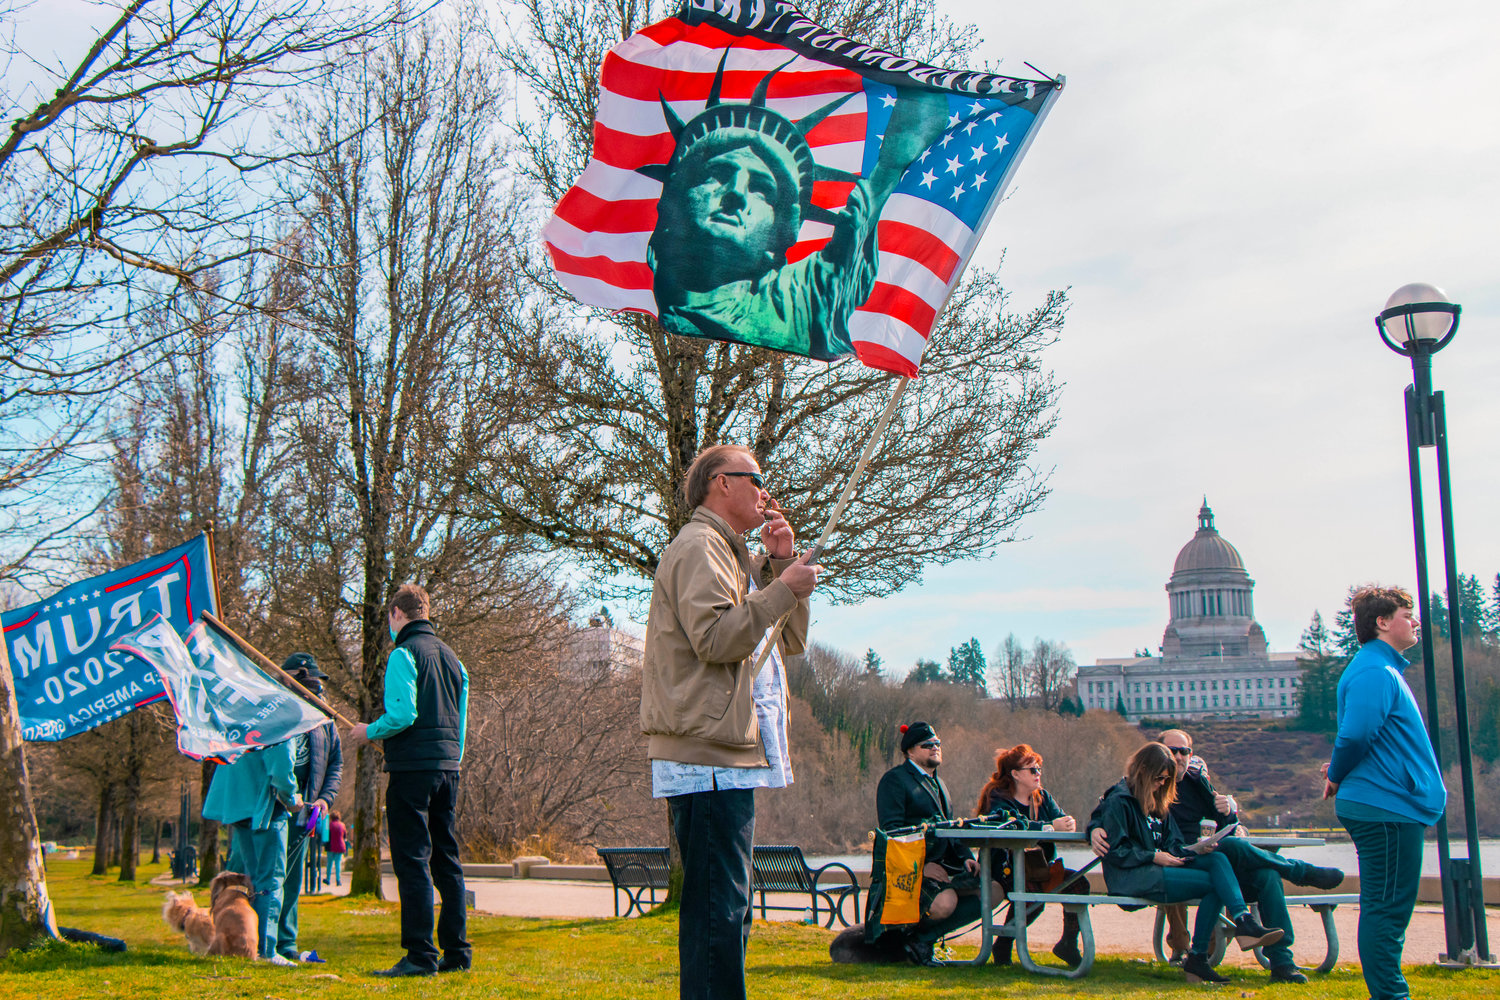 Flags are waved by attendees of a rally in support of reopening schools to full in-person learning near Capitol Lake in Olympia on Saturday.